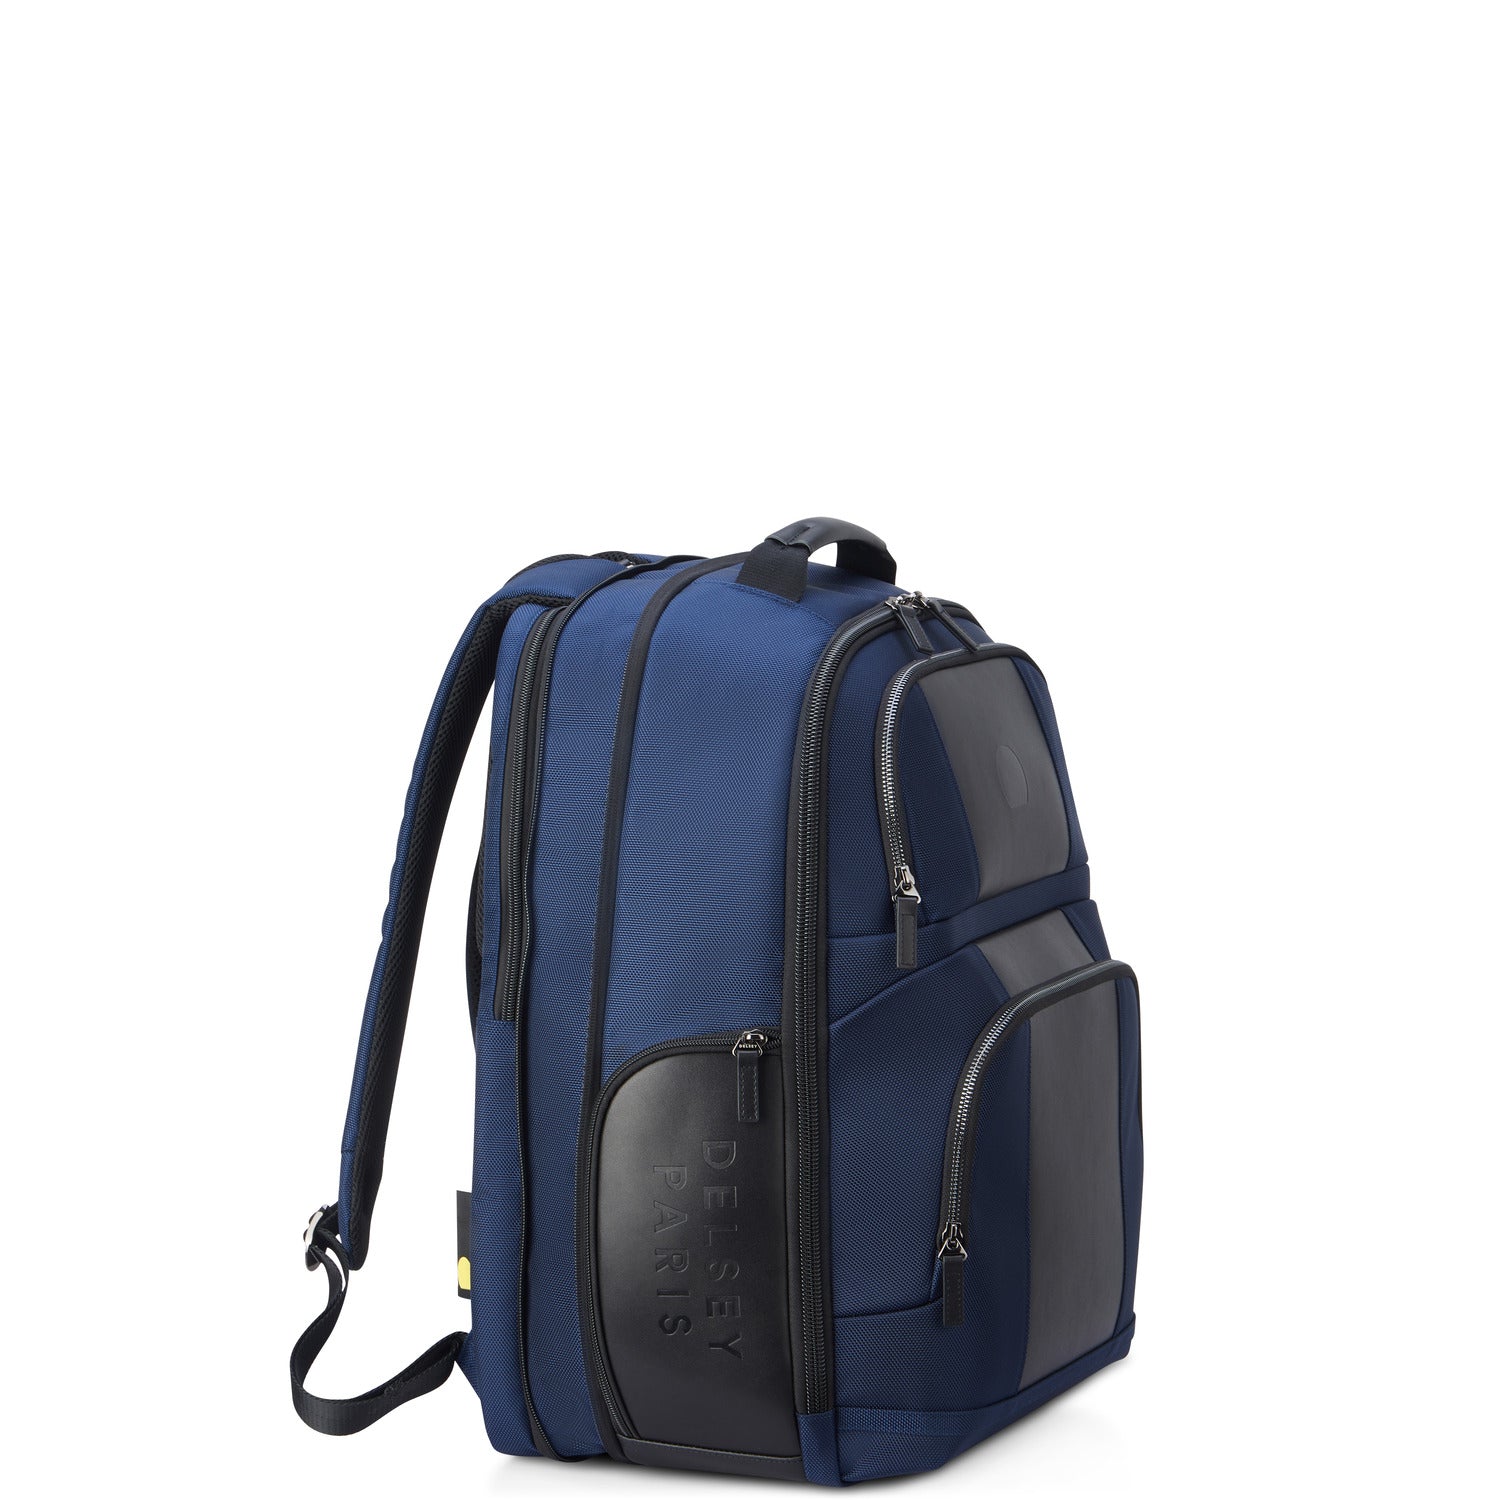 Delsey Wagram Compartment Backpack Laptop  17. 3 inch Navy Blue - 00119962002